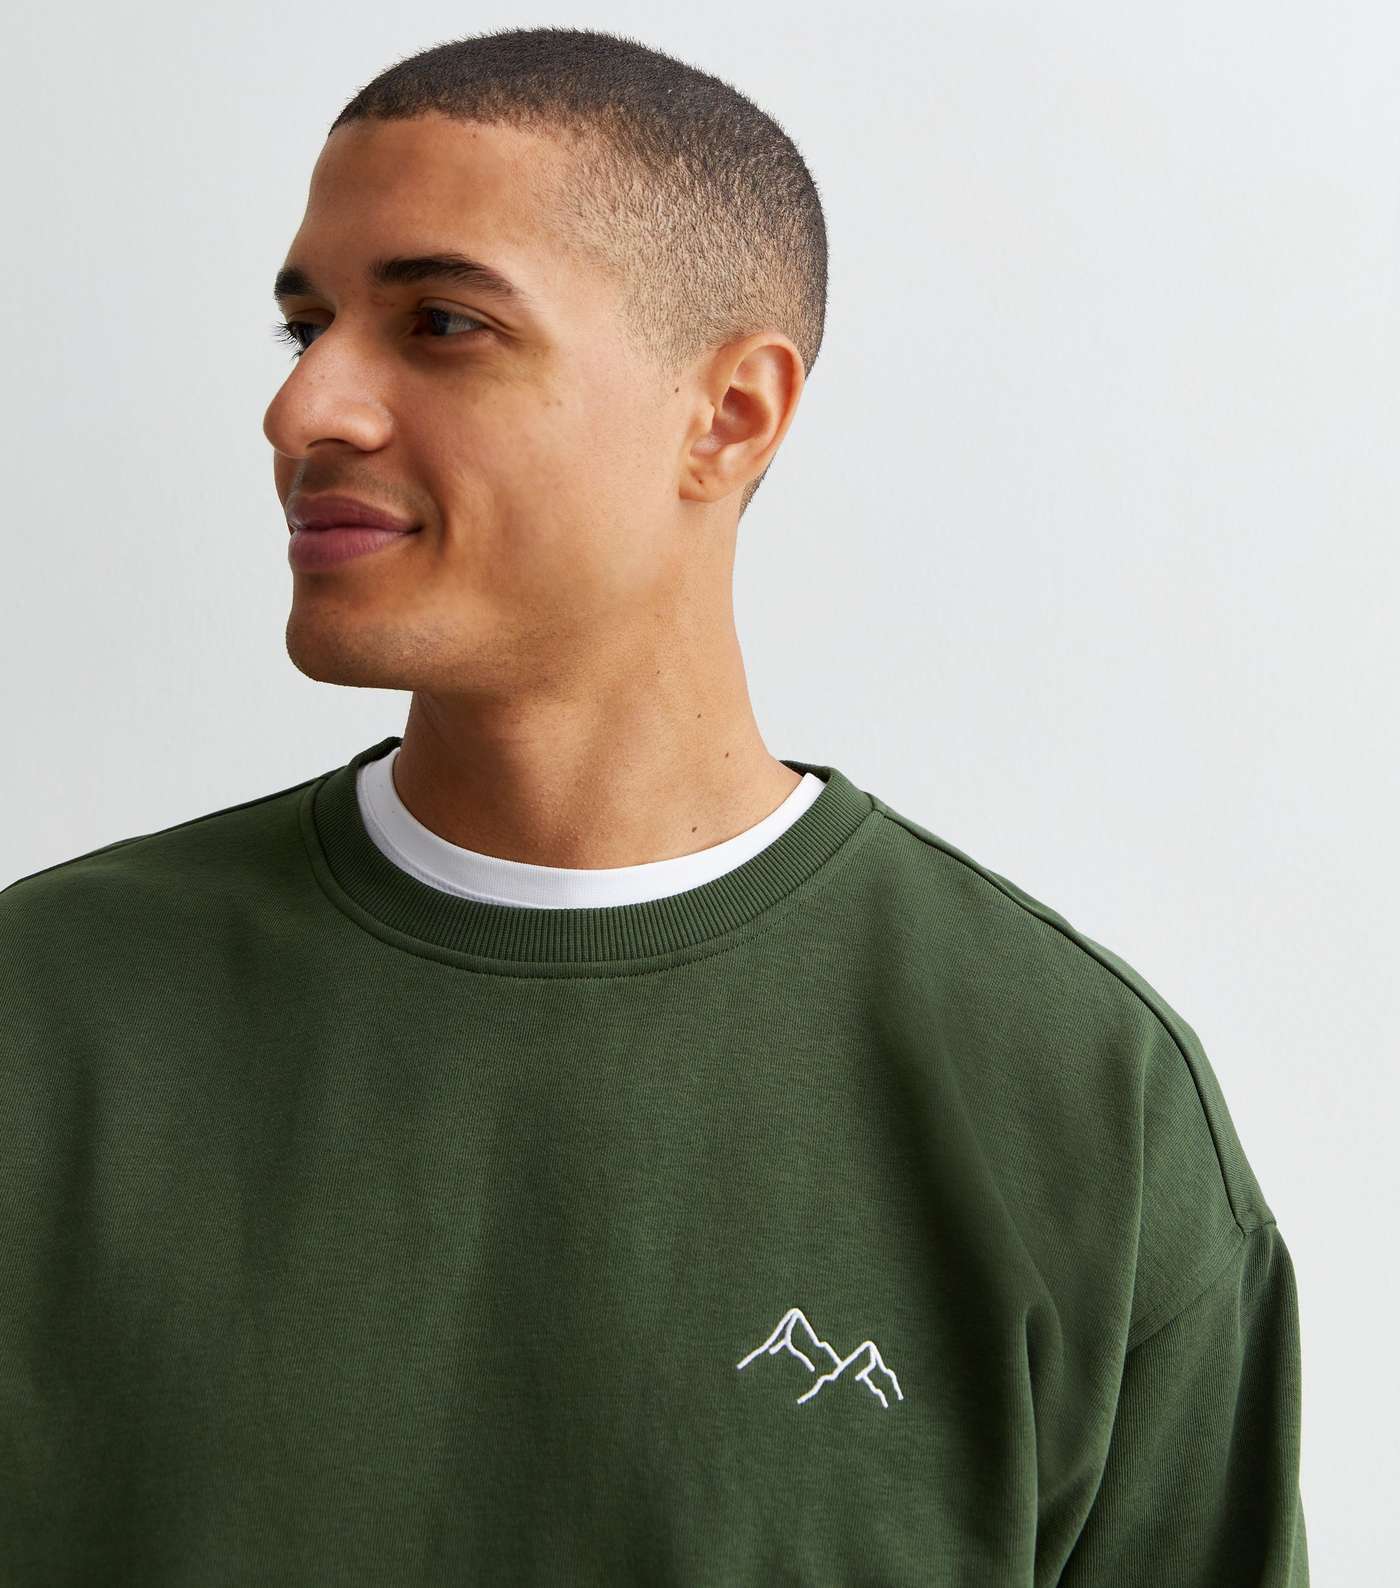 Khaki Mountain Embroidered Crew Neck Relaxed Fit Sweatshirt Image 2